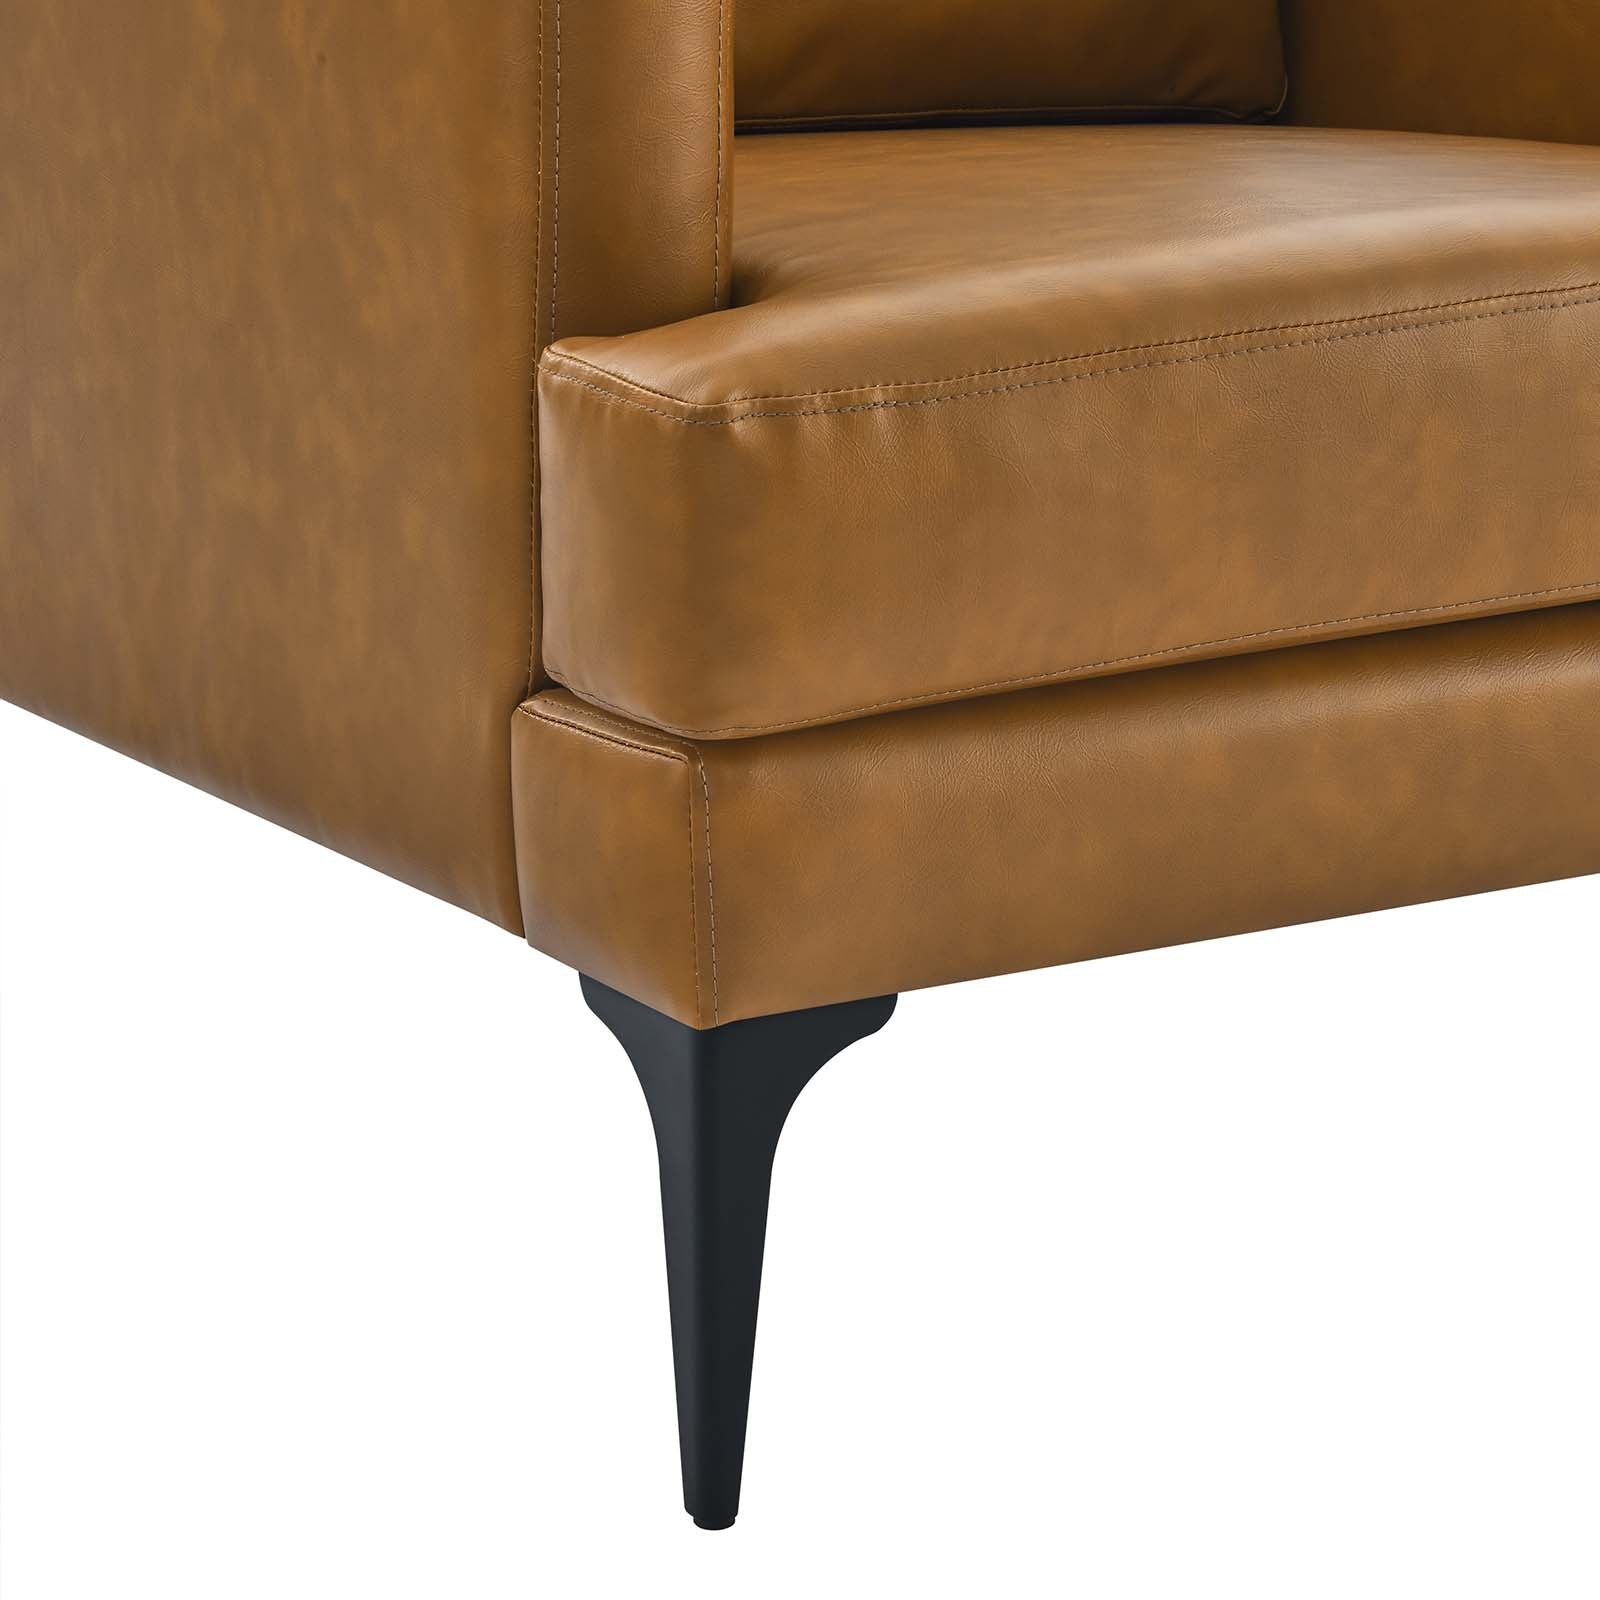 Evermore Vegan Leather Armchair - East Shore Modern Home Furnishings